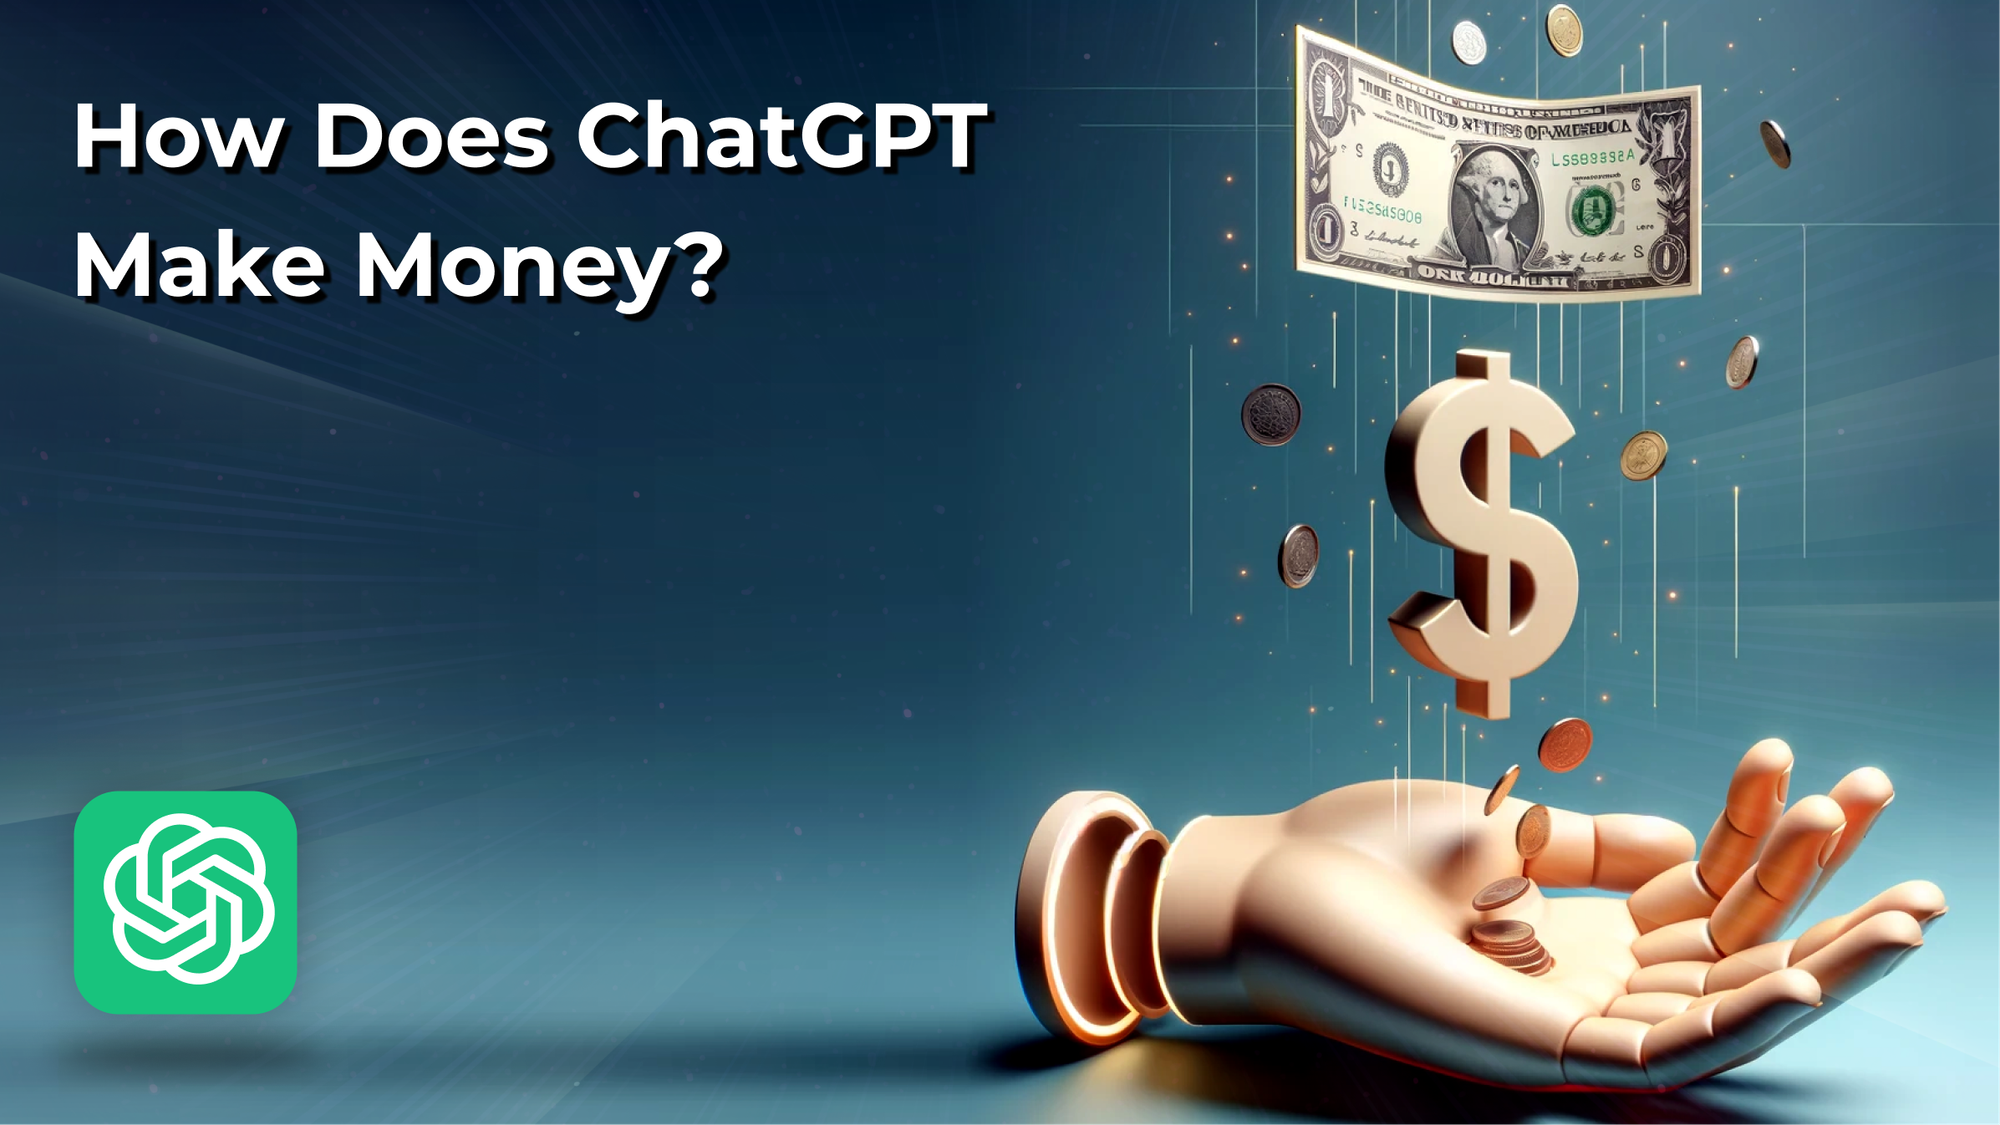 How Does ChatGPT Make Money